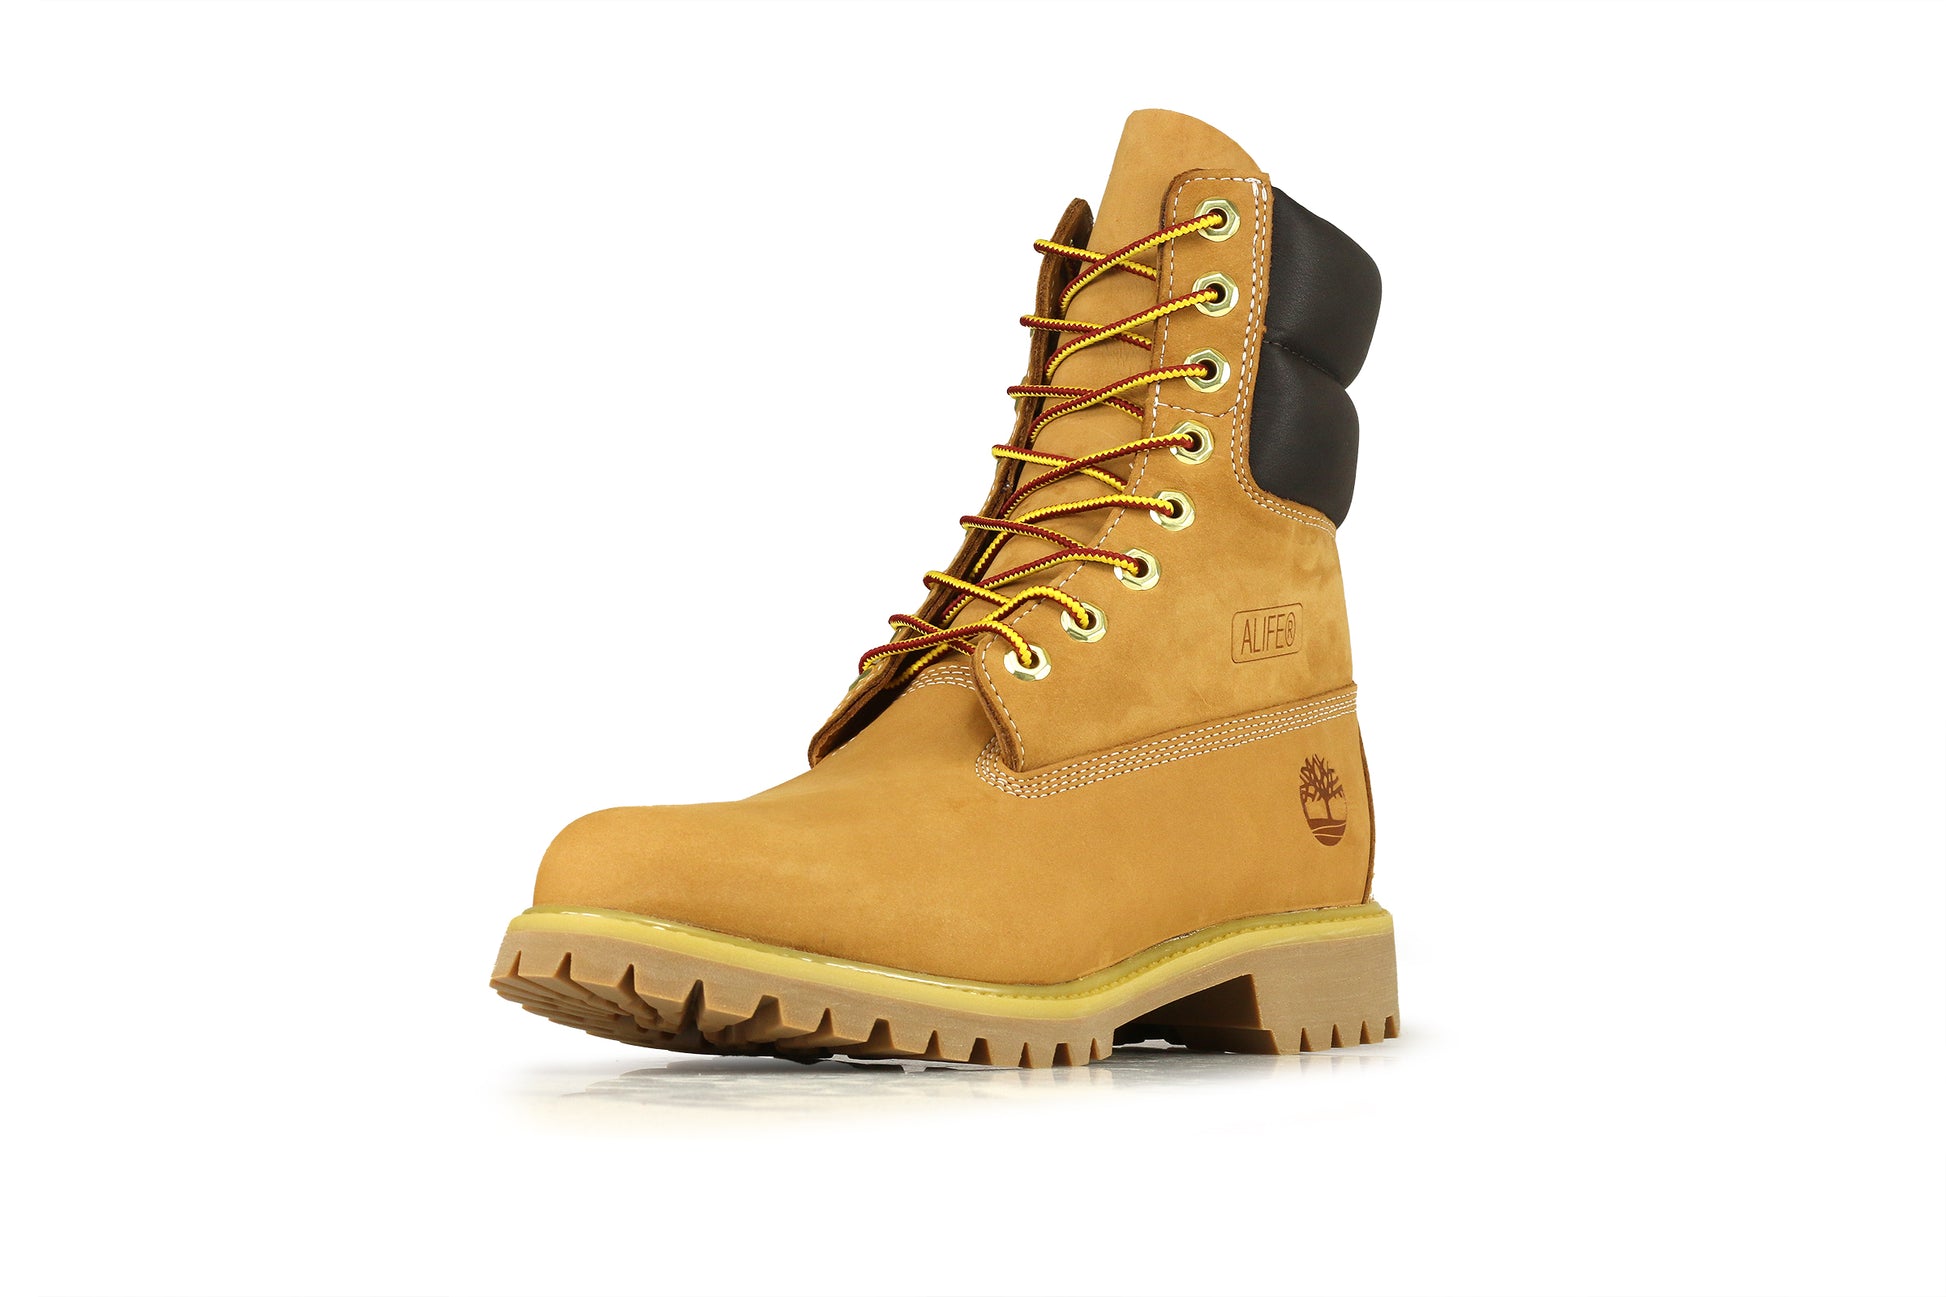 Pakistaans onkruid Uluru Beyoncé in special-edition tb0a1amk Timberland x Bee Line Honeycomb boots